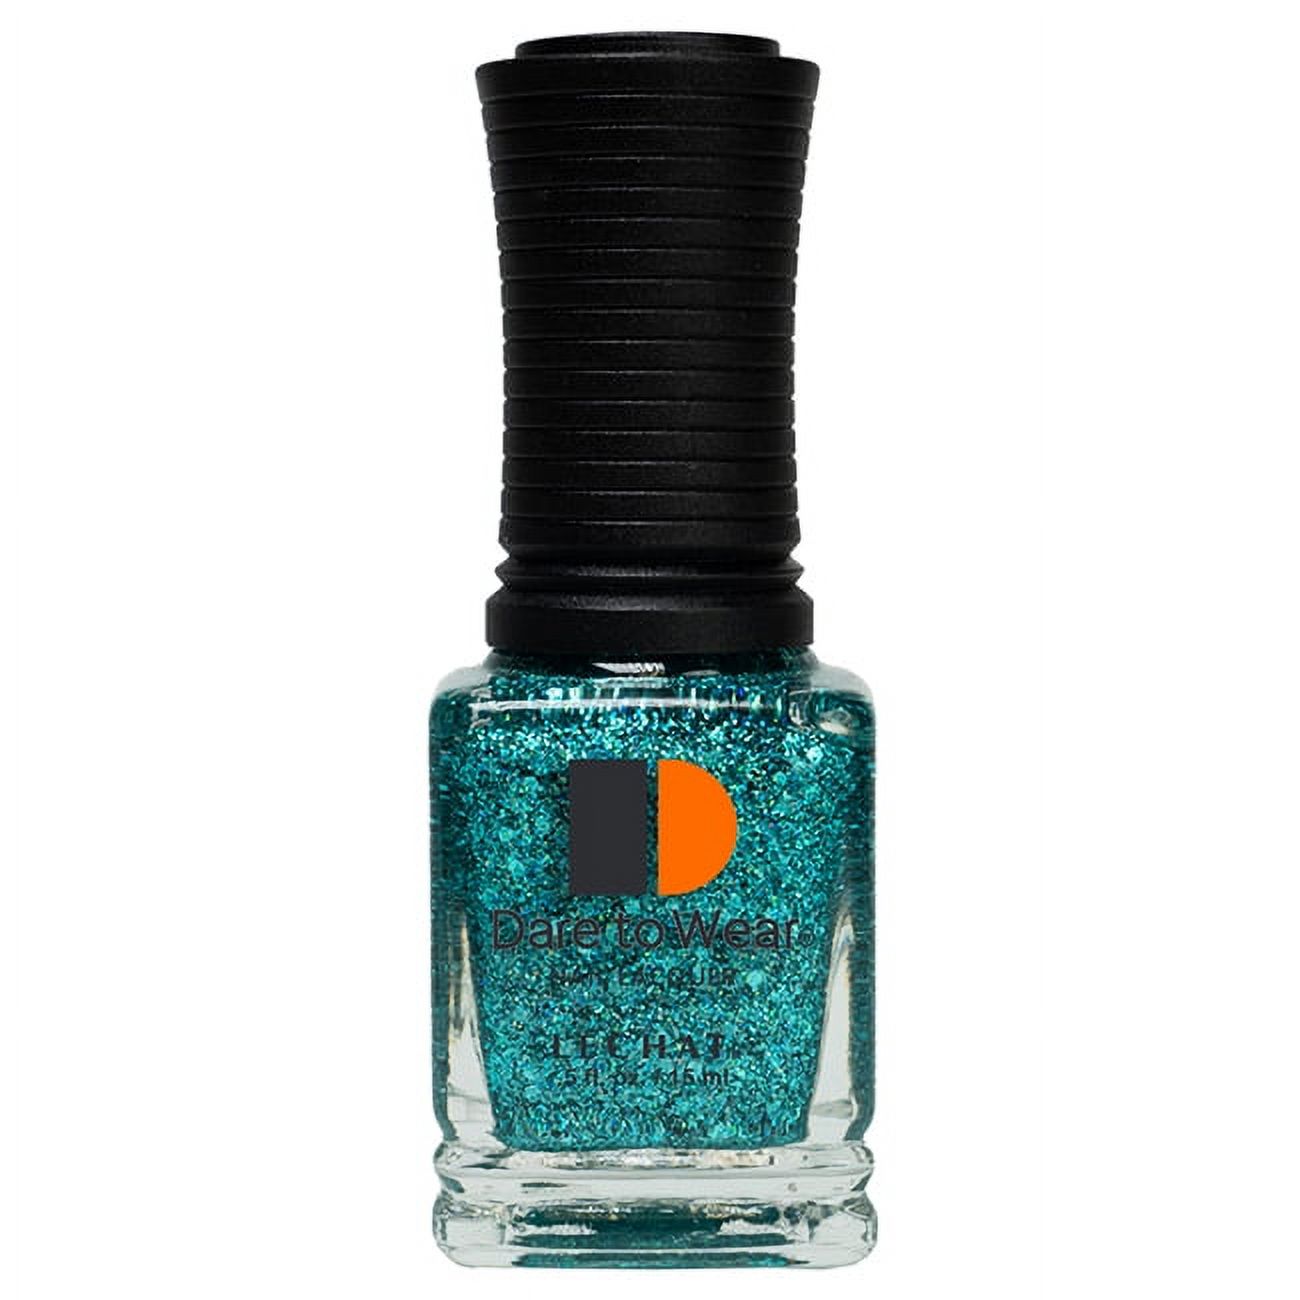 LeChat Dare to Wear Sky Dust Glitter Nail Lacquer Gamma Ray - .5 oz - image 1 of 1